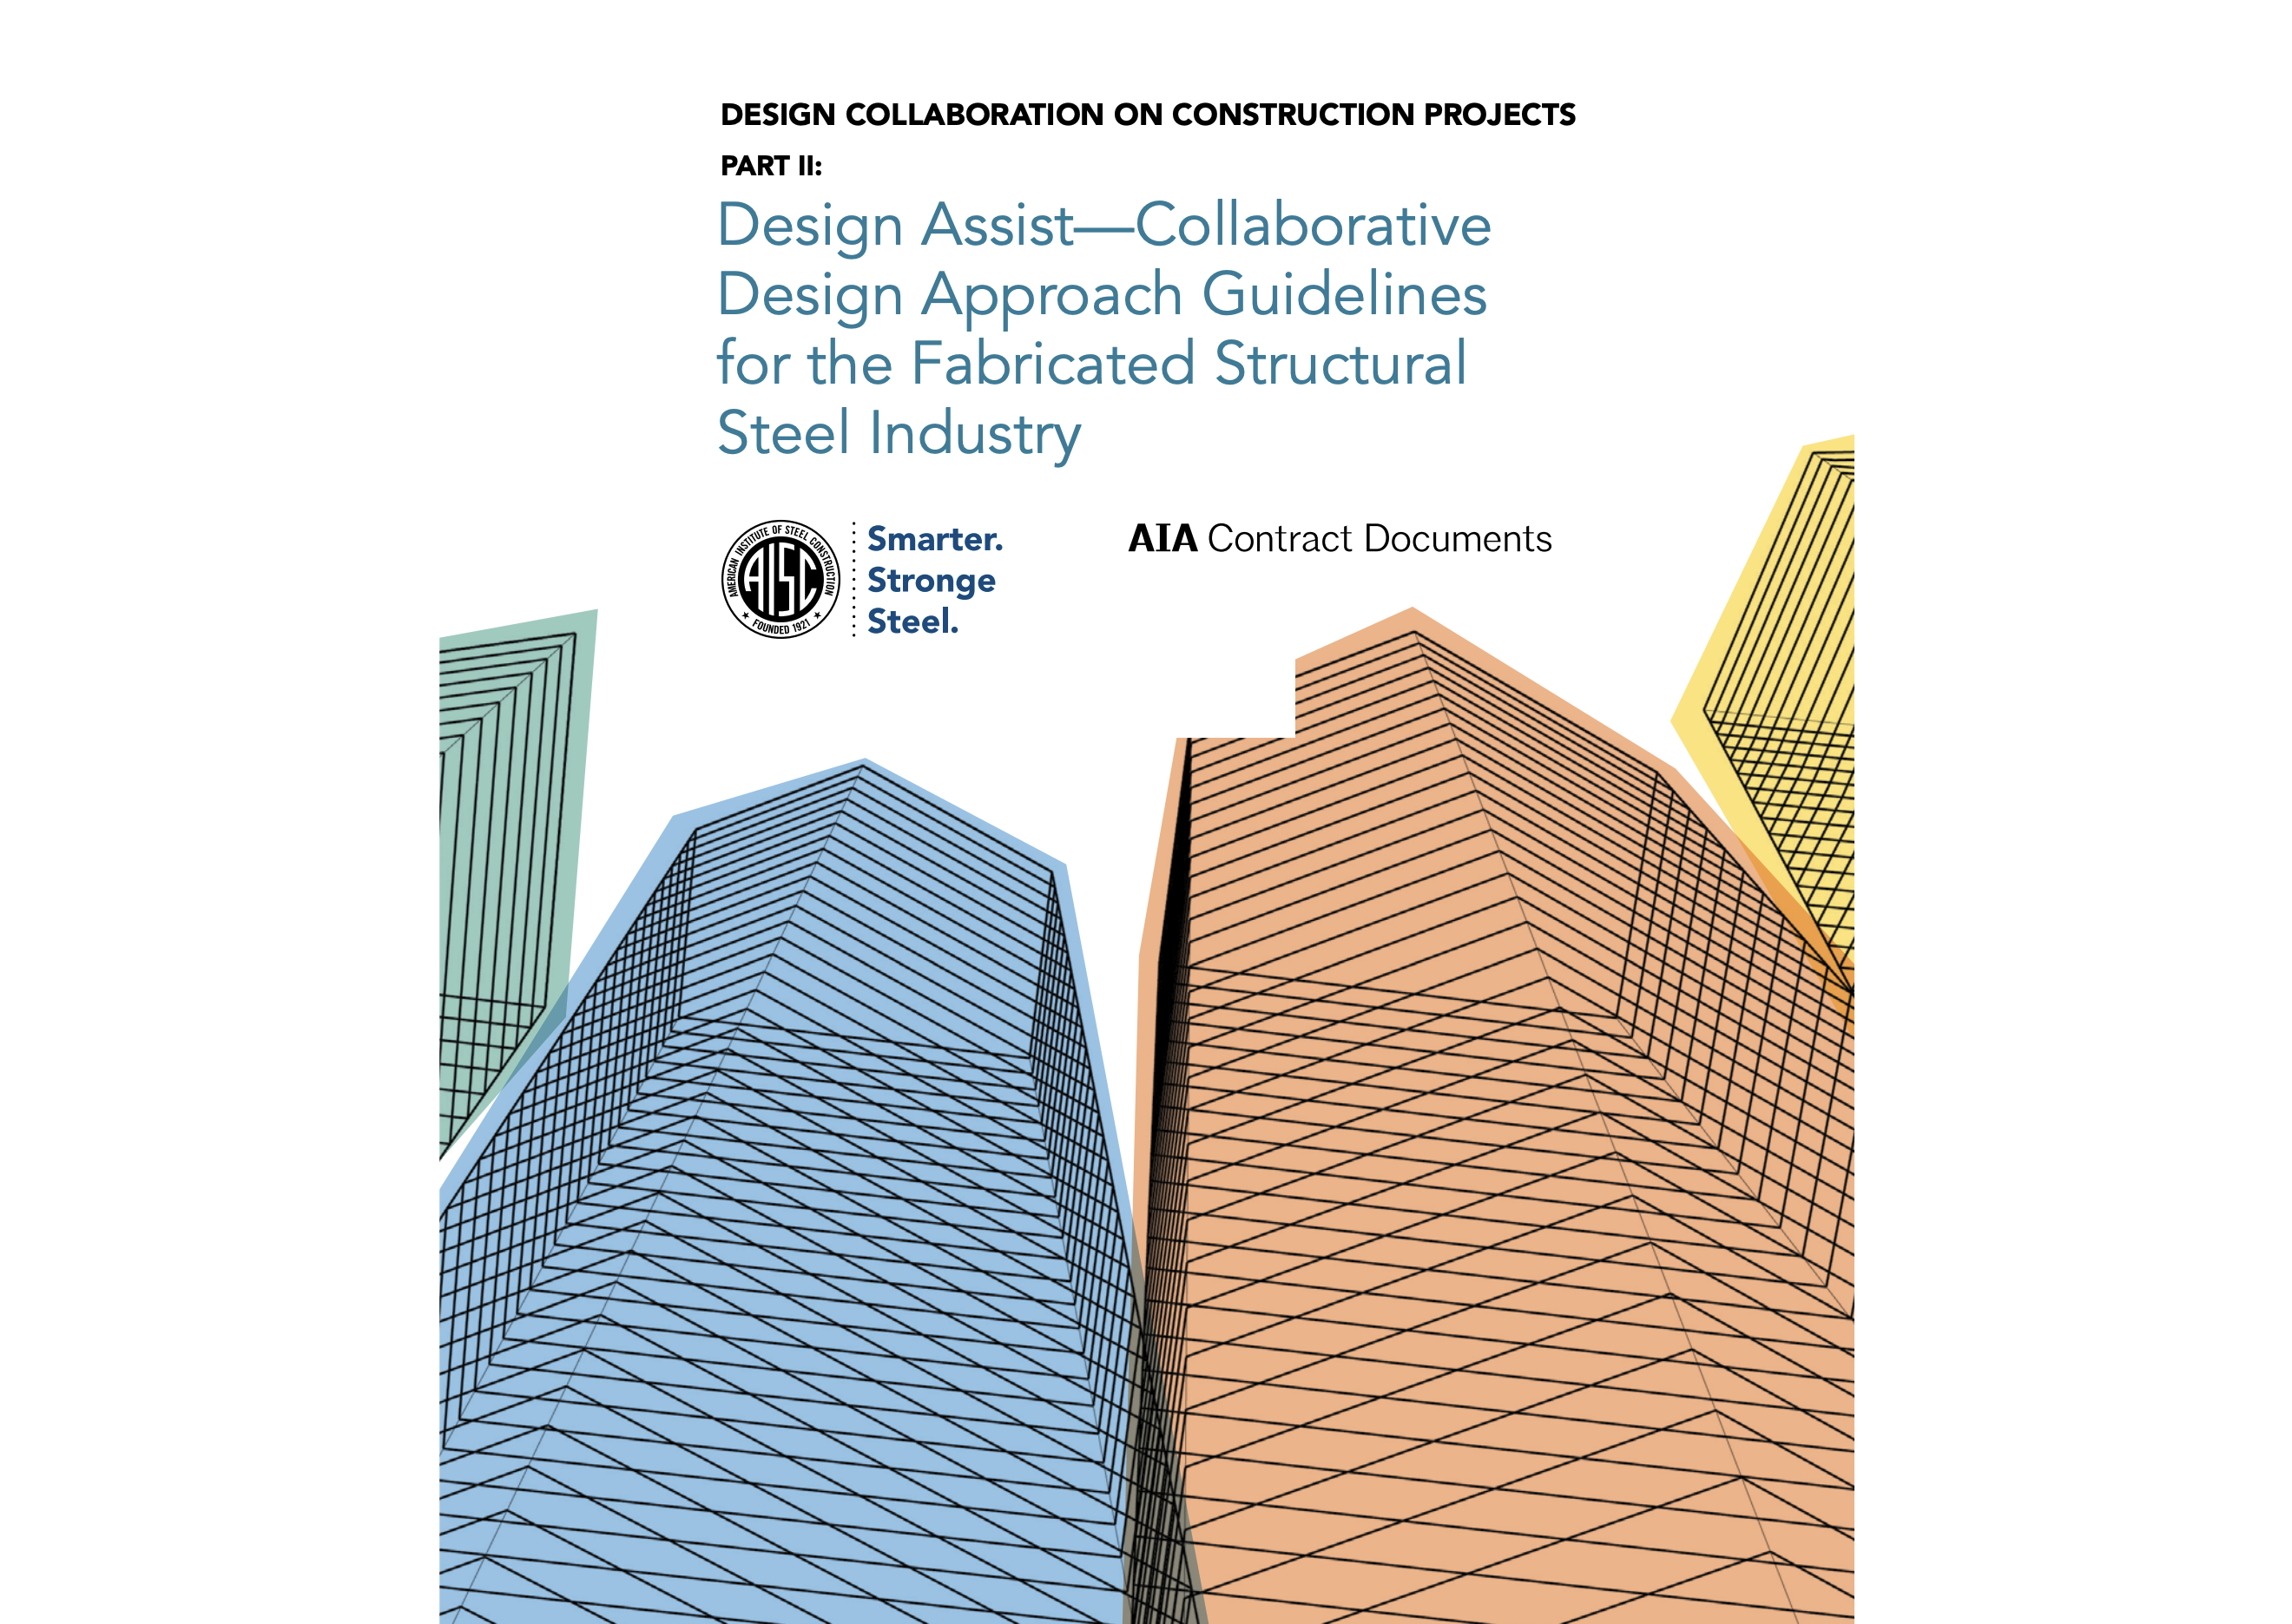 AISC, AIA release second part of design assist guidelines for the structural steel industry